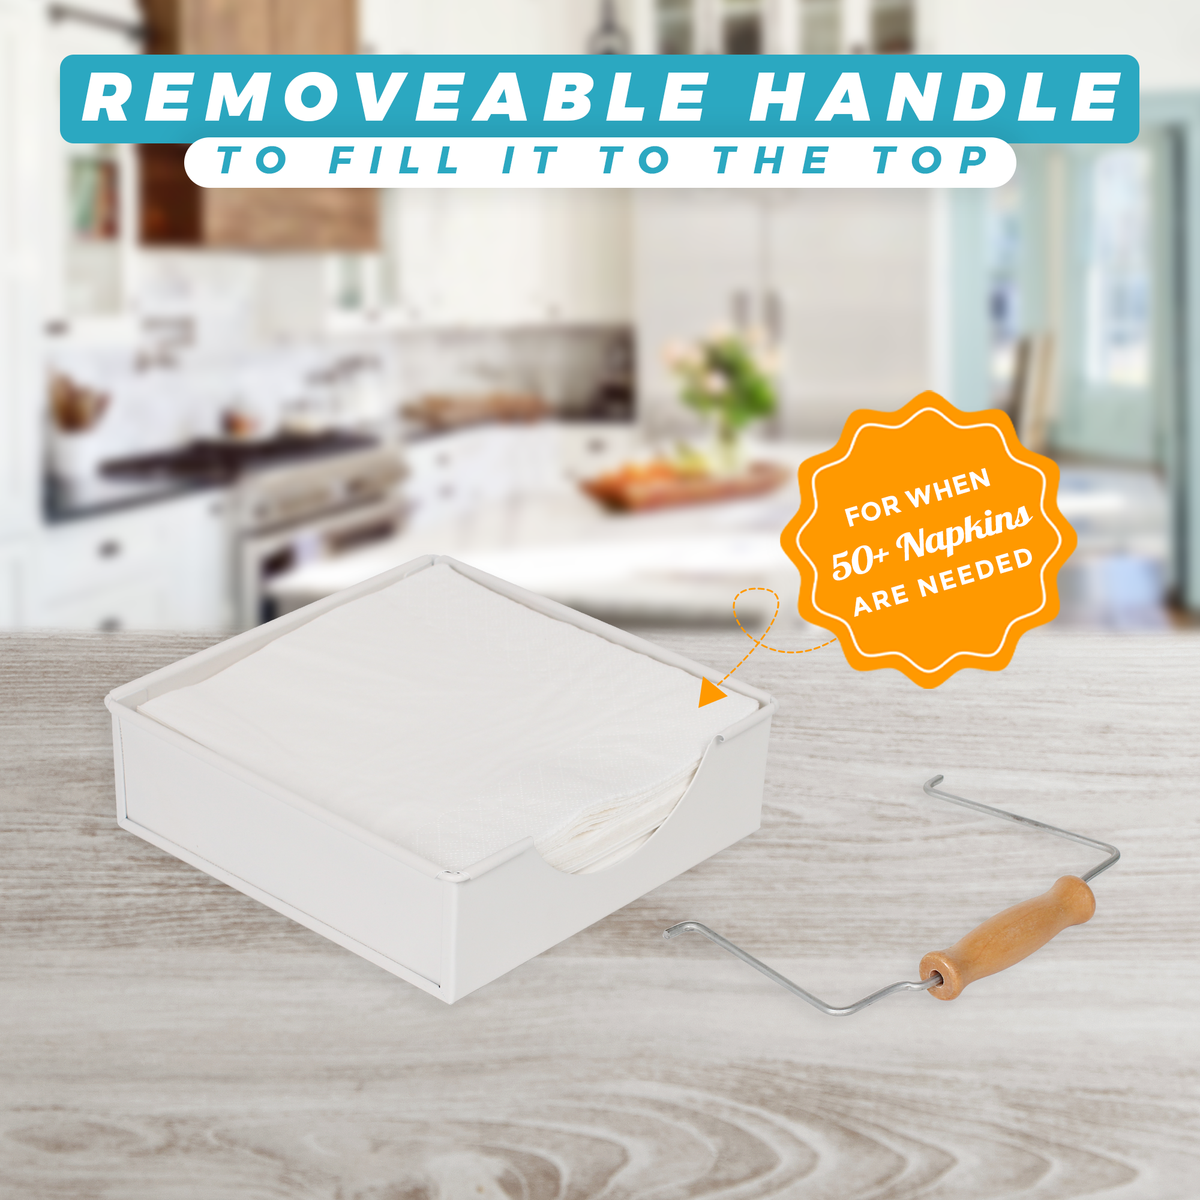 White napkin holder with removable arm when needed to hold 50+ napkins